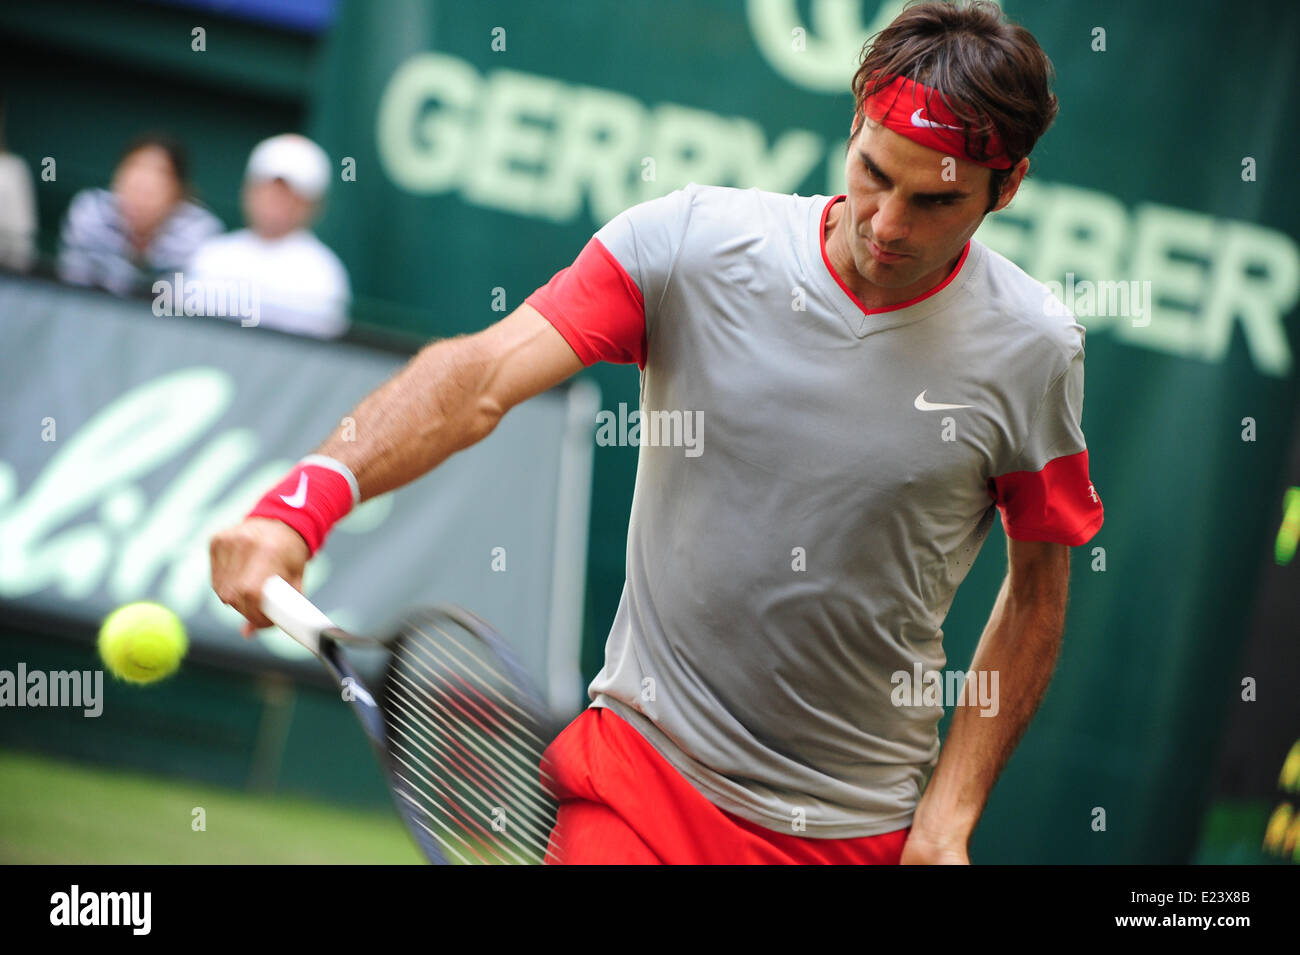 Halle (Westfalen), Germany. 15 June, 2014. 7 times Wimbledon champion Roger Federer wins his 7th title at the Gerry Weber Open defeating the world number 69 Alejandro Falla from Colombia 7:6 7:6. Photo: Miroslav Dakov/ Alamy Live News Stock Photo